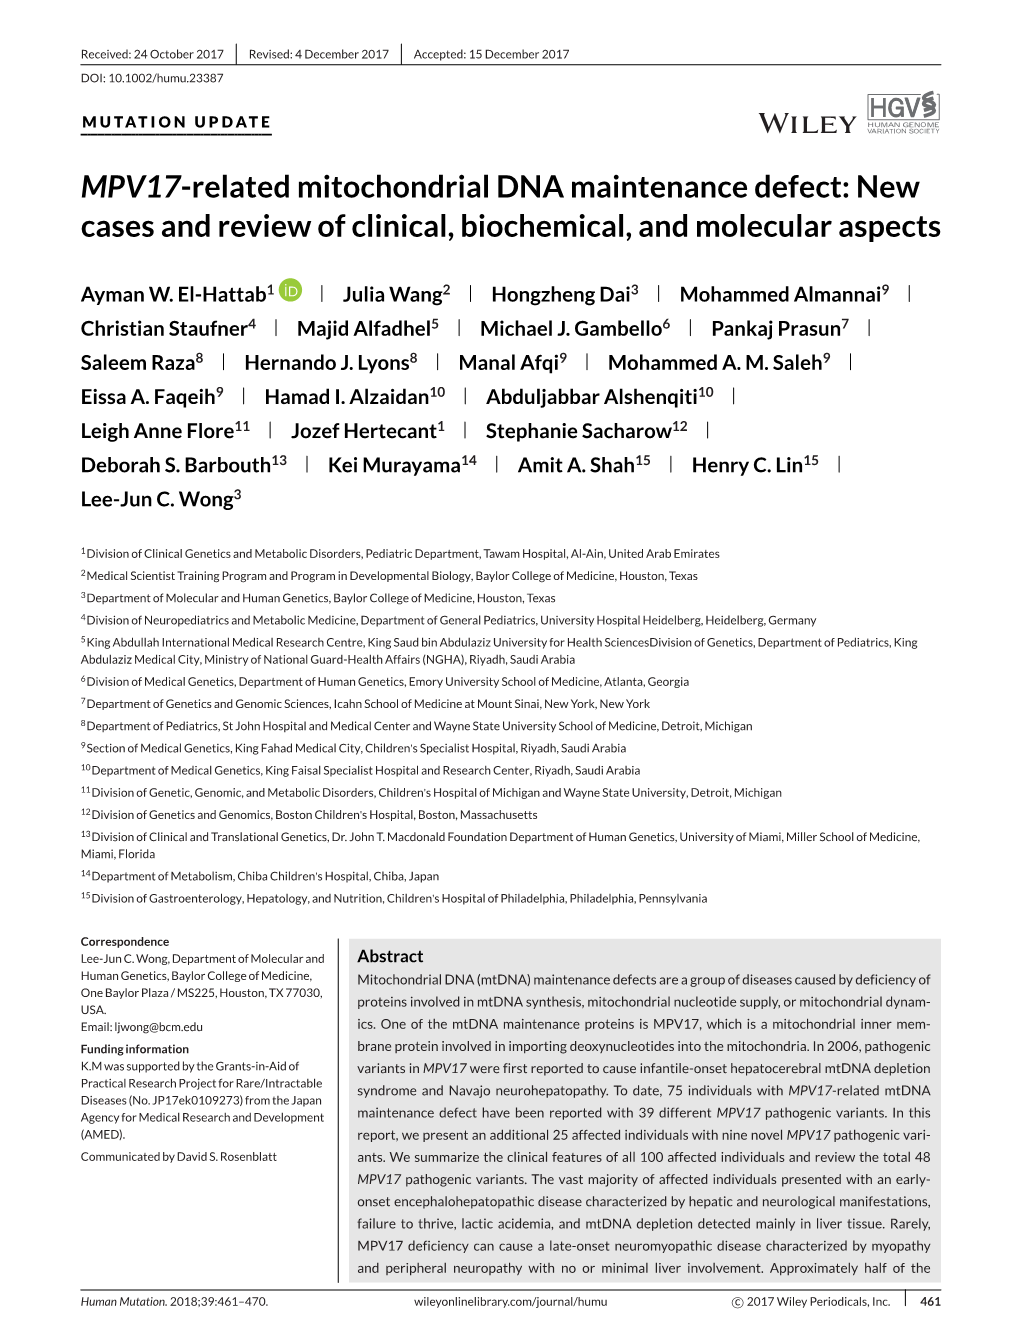 MPV17-Related Mitochondrial DNA Maintenance Defect: New Cases and Review of Clinical, Biochemical, and Molecular Aspects